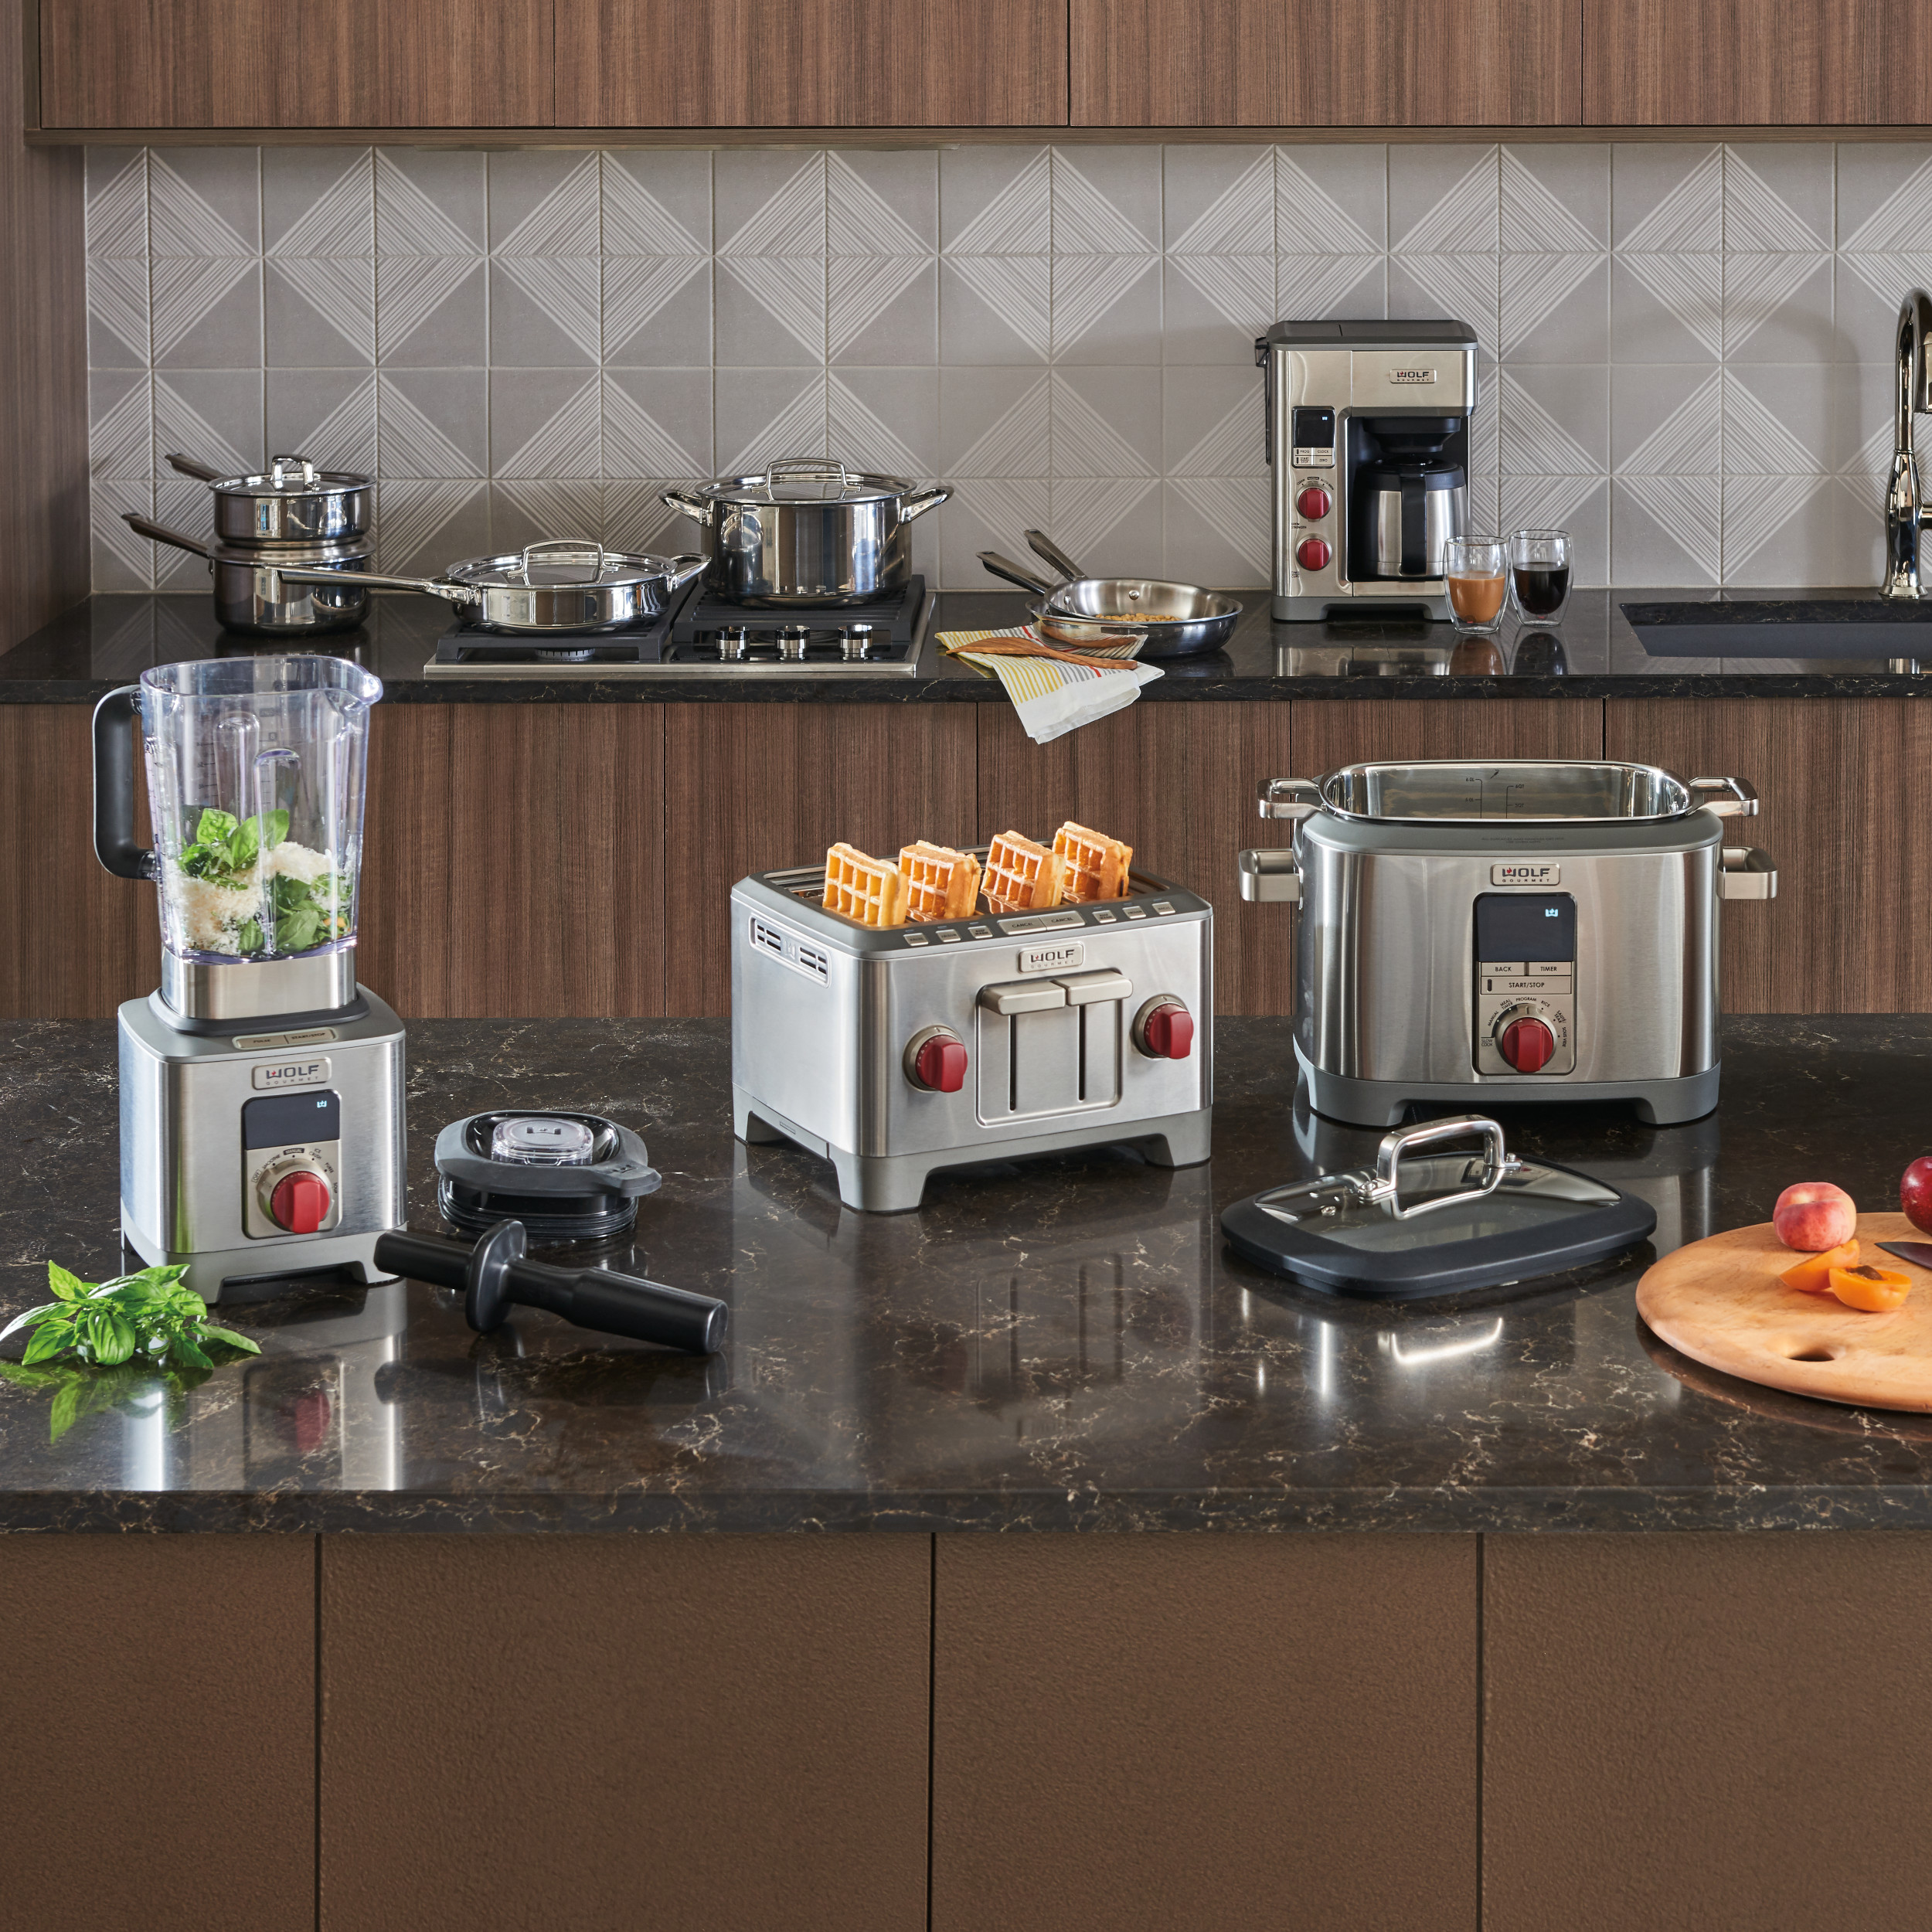 Group shot of Wolf Gourmet Precision Blender, Four-Slice Toaster, and Multi-Function Cooker, with Coffee Maker and Cookware in background